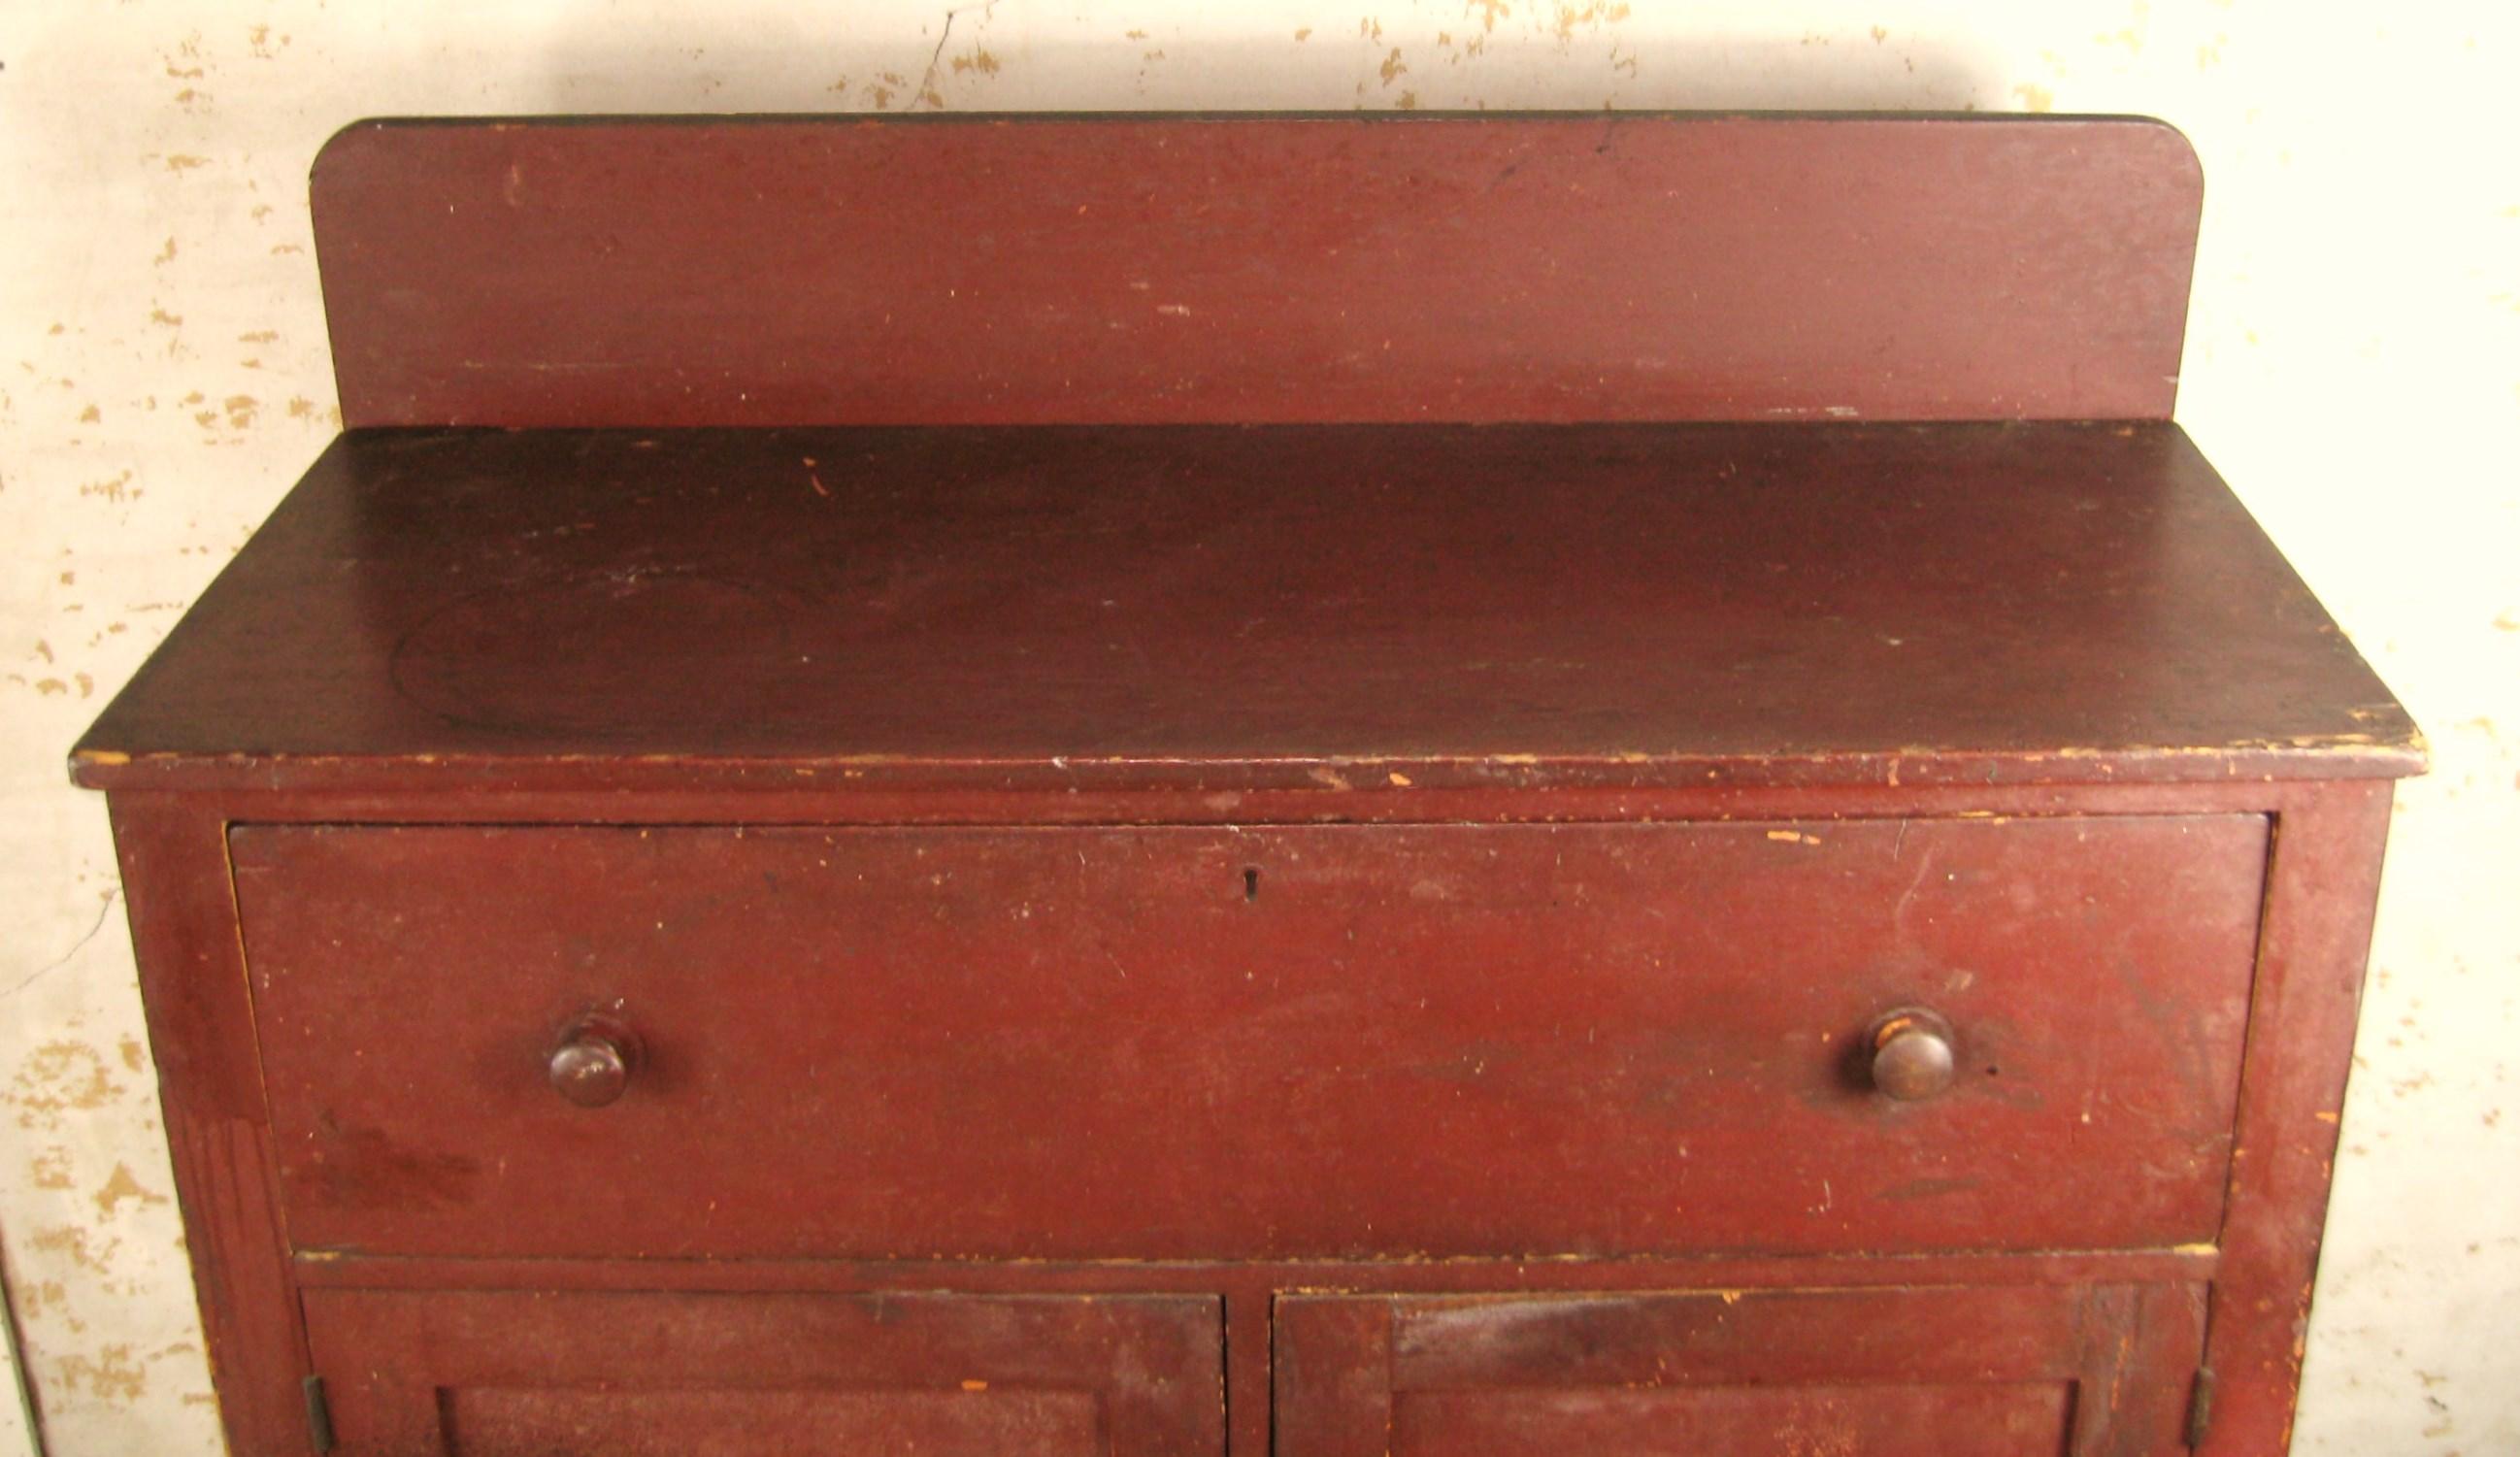 Mid 19th century red wash/paint primitive jelly cupboard, one draw over two doors with a gallery. It has turned front legs, butt hinges and shelves. It has had some repairs over its life, one door has been repaired, and there has been a very old